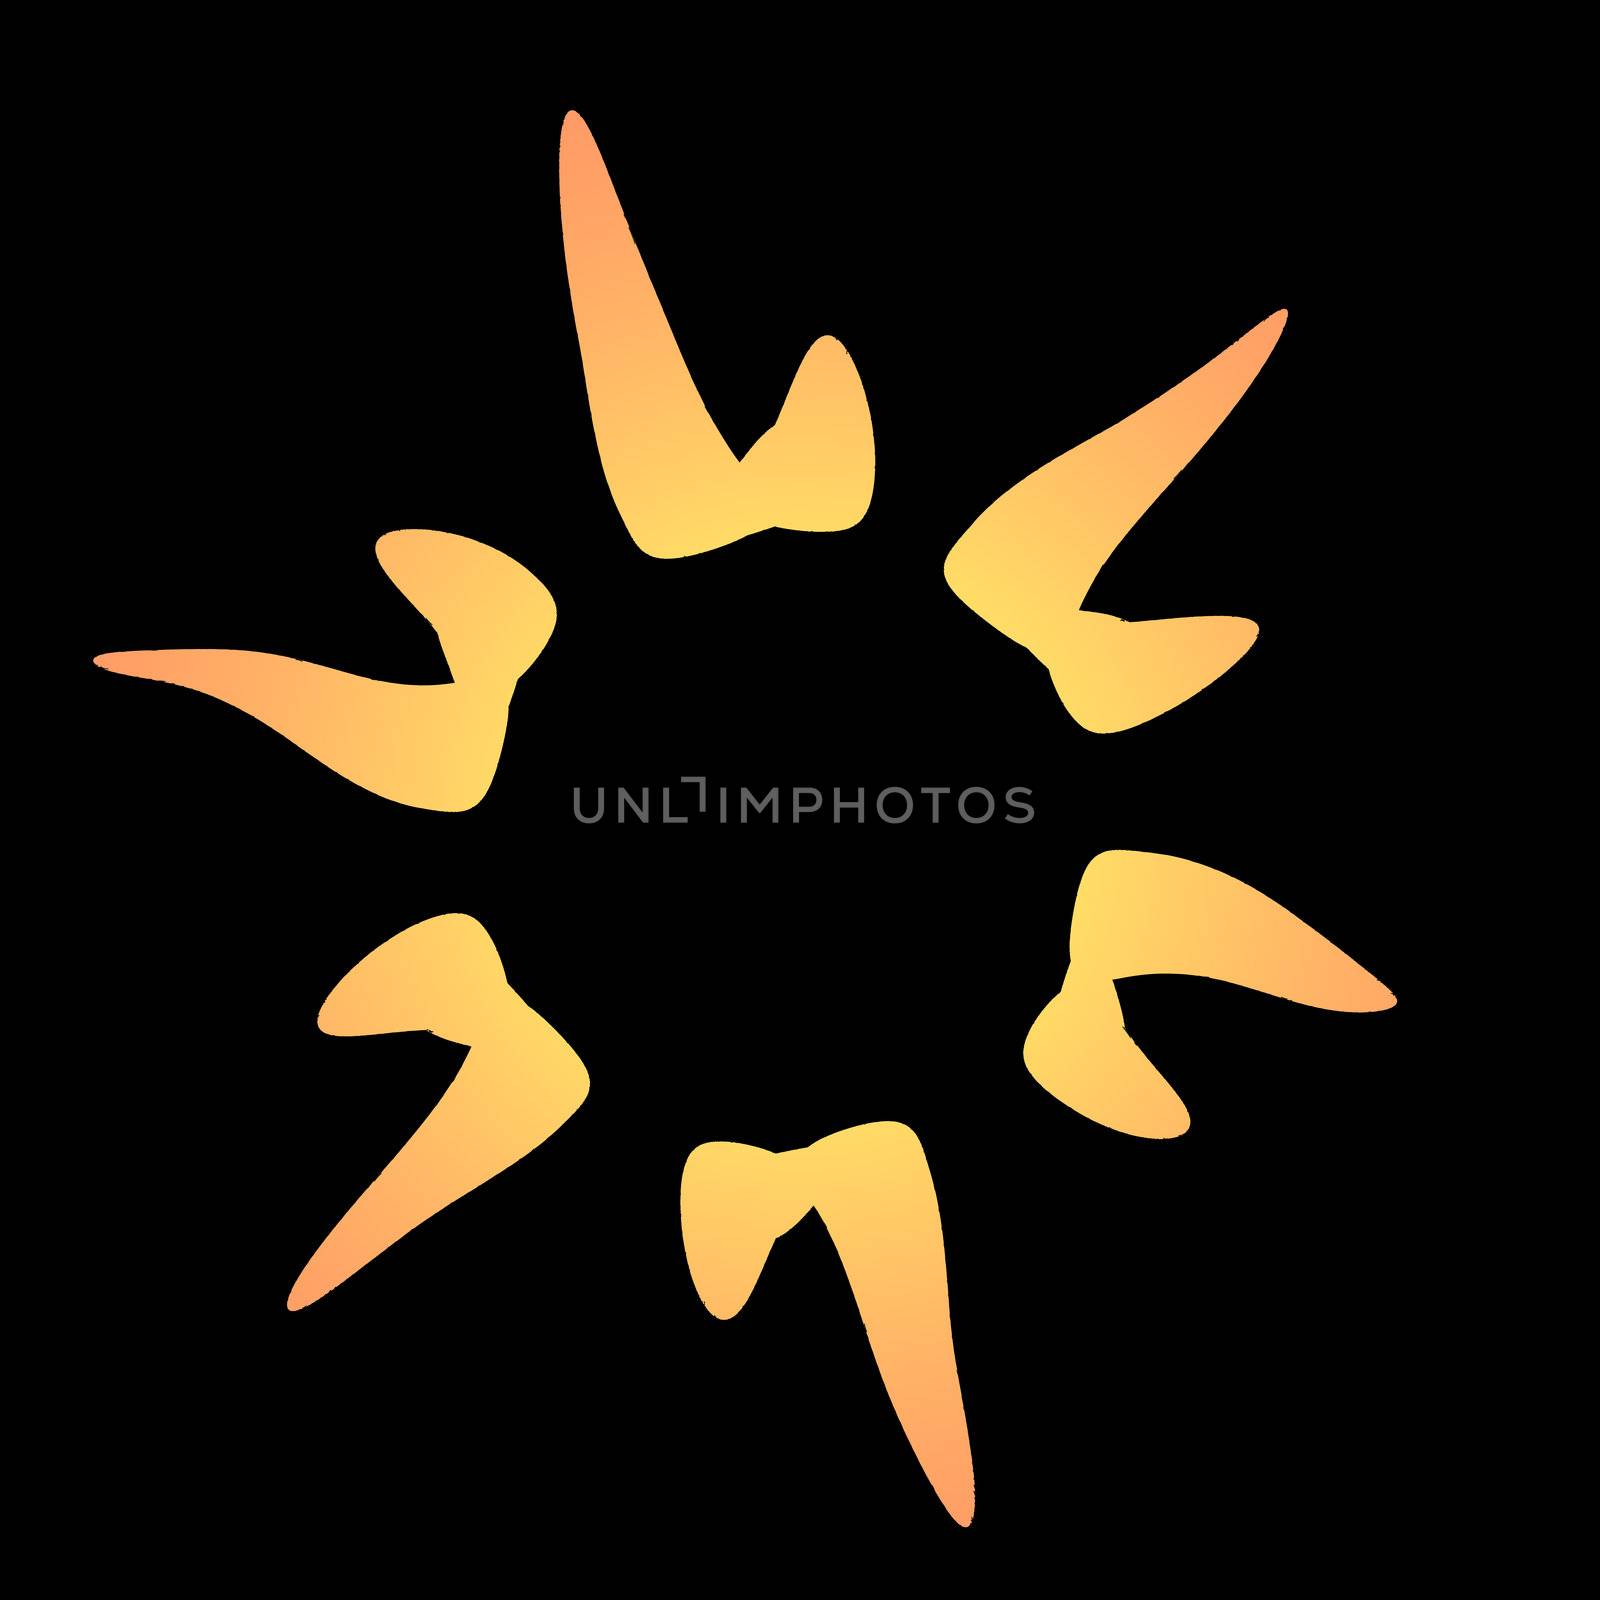 An abstract illustration of the sun done in shades of yellow and orange on a black background.